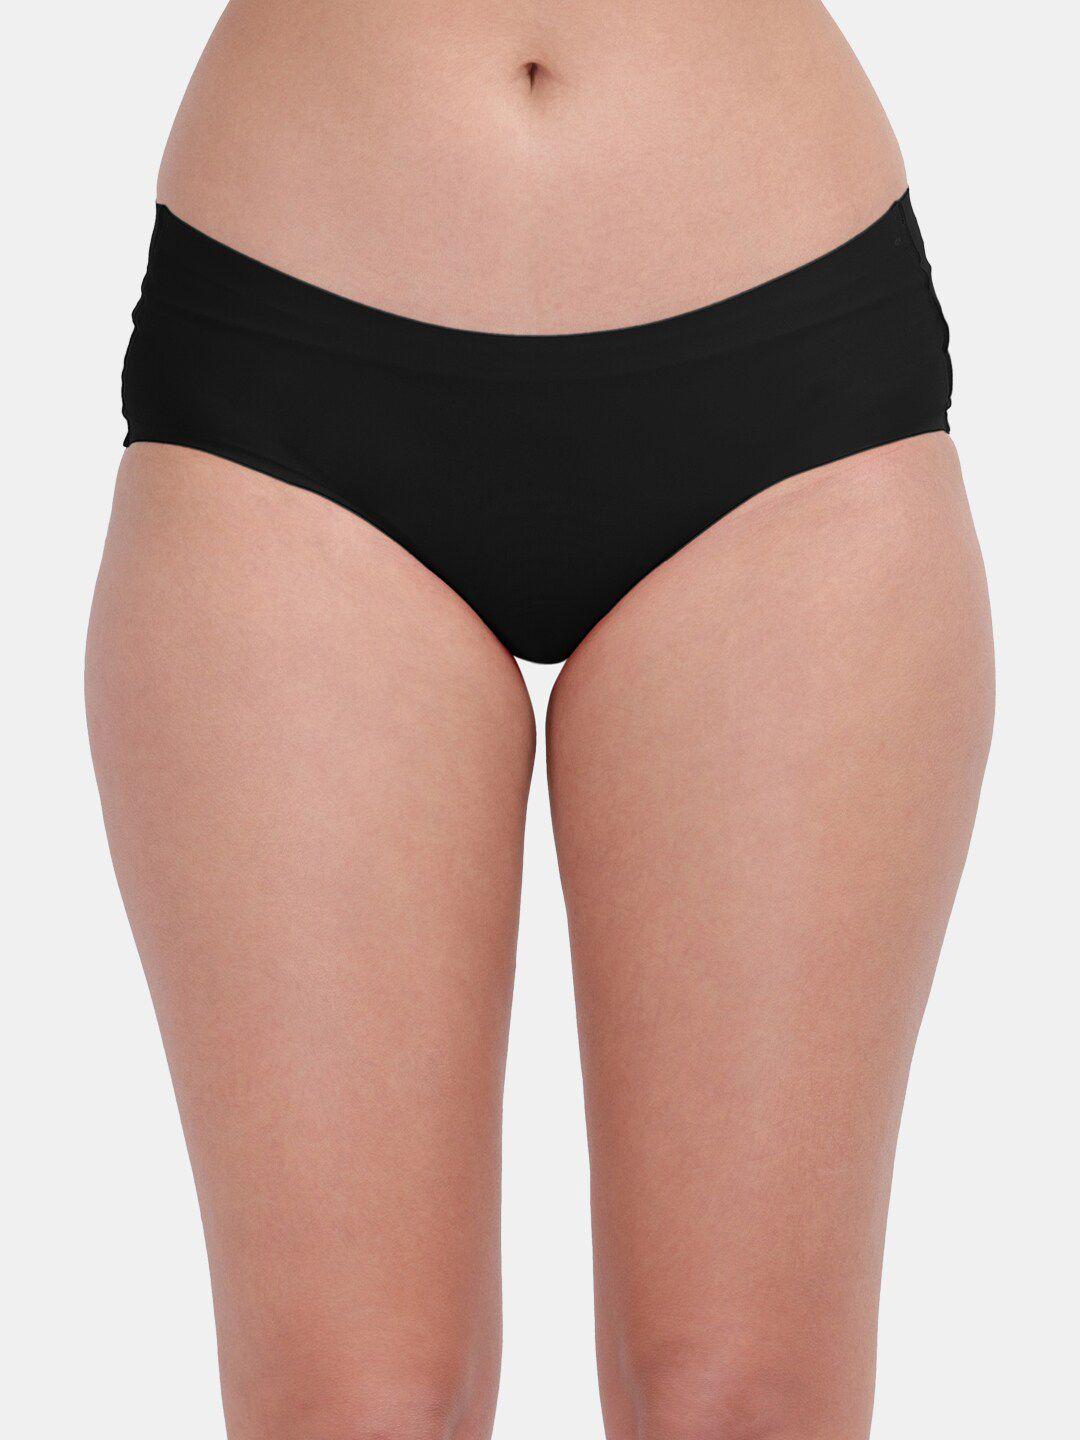 amour-secret-women-black-anti-bacterial-hipster-brief